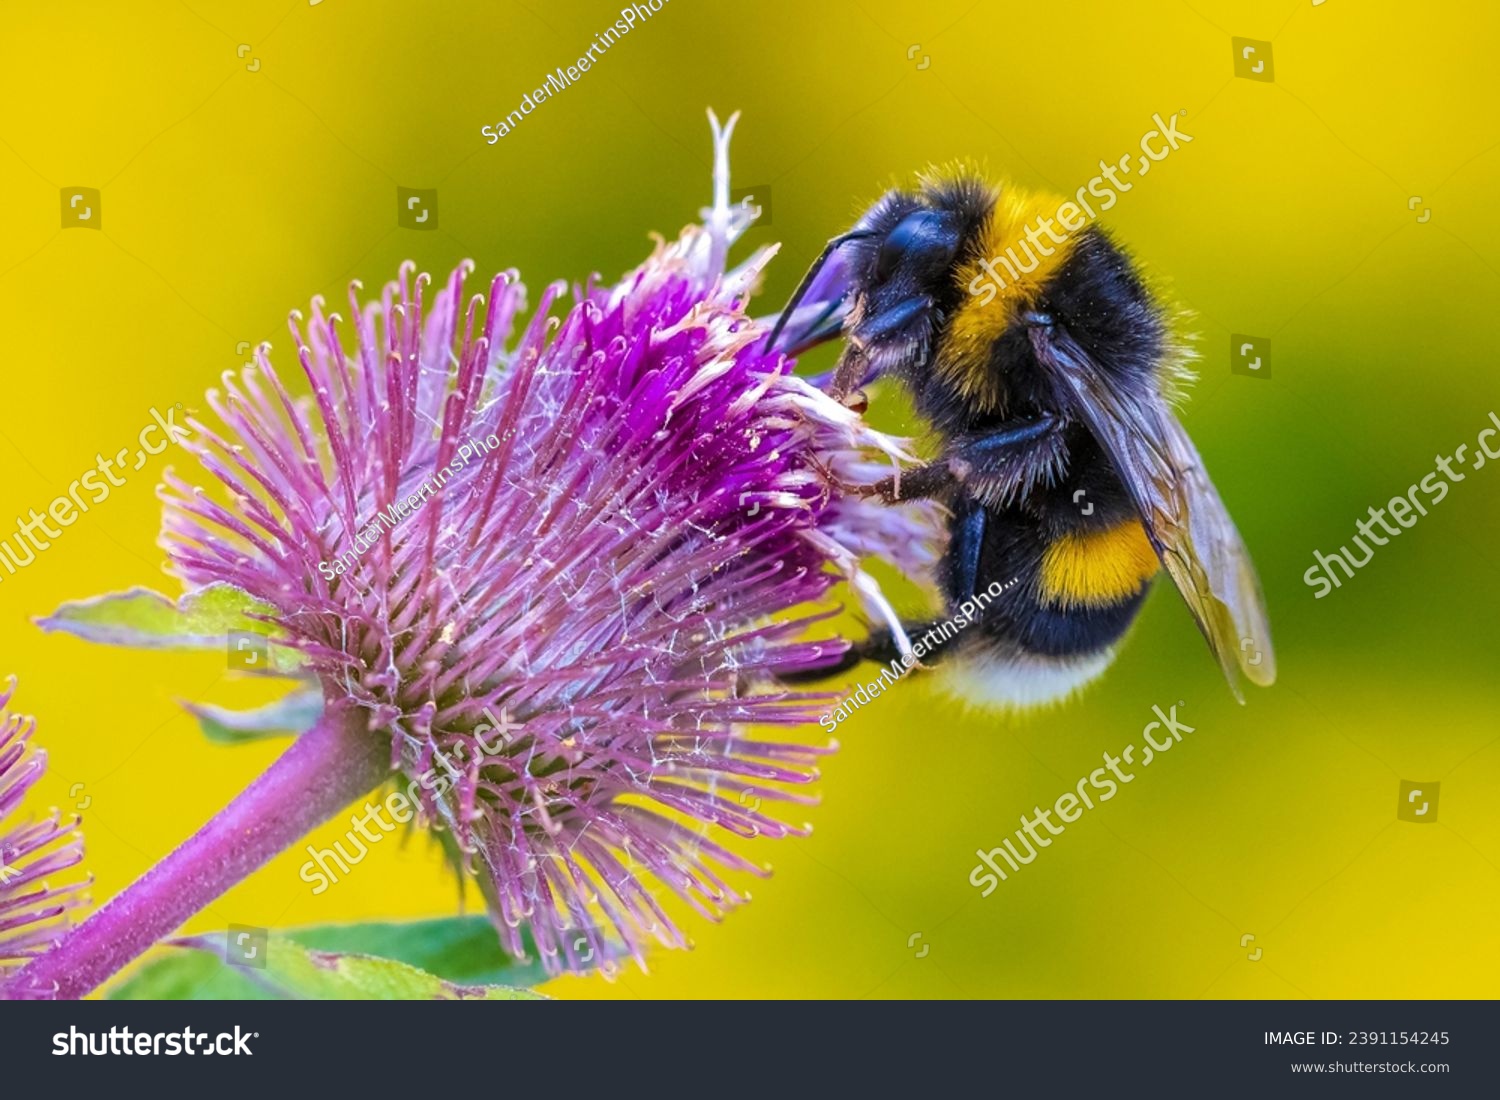 Closeup of a Bombus terrestris, the buff-tailed bumblebee or large earth bumblebee, feeding nectar of pink flowers  #2391154245